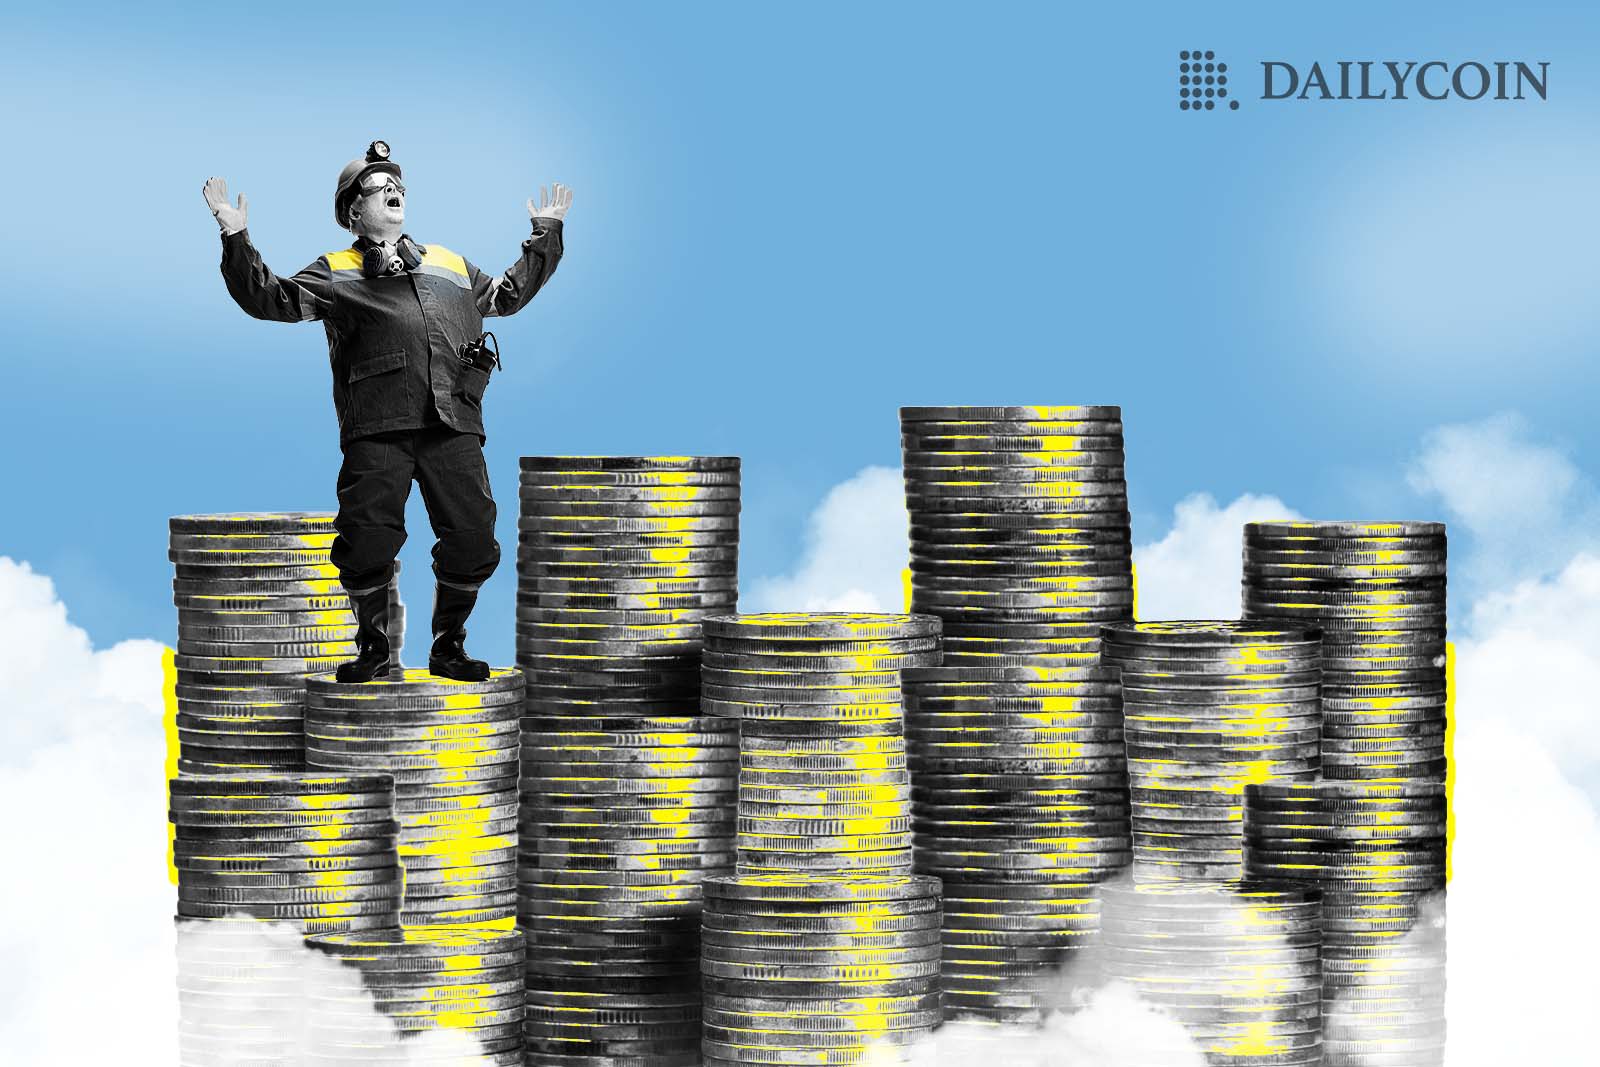 Man in suit standing on top of a pile of coins in the clouds.